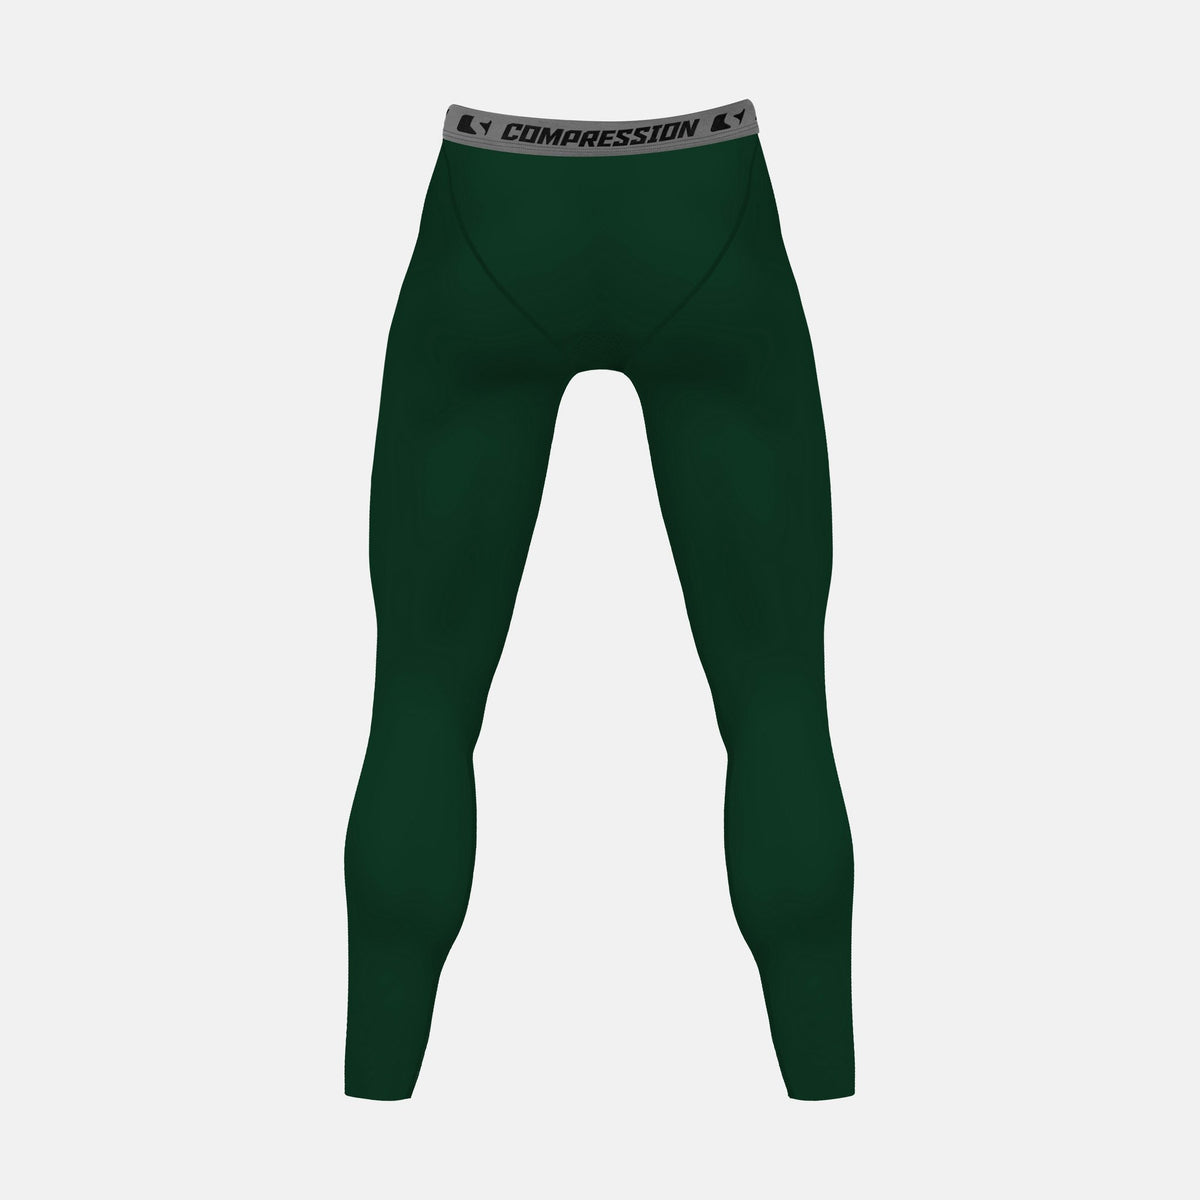 Hue Dark Green Solid compression tights / leggings – timur-test-store